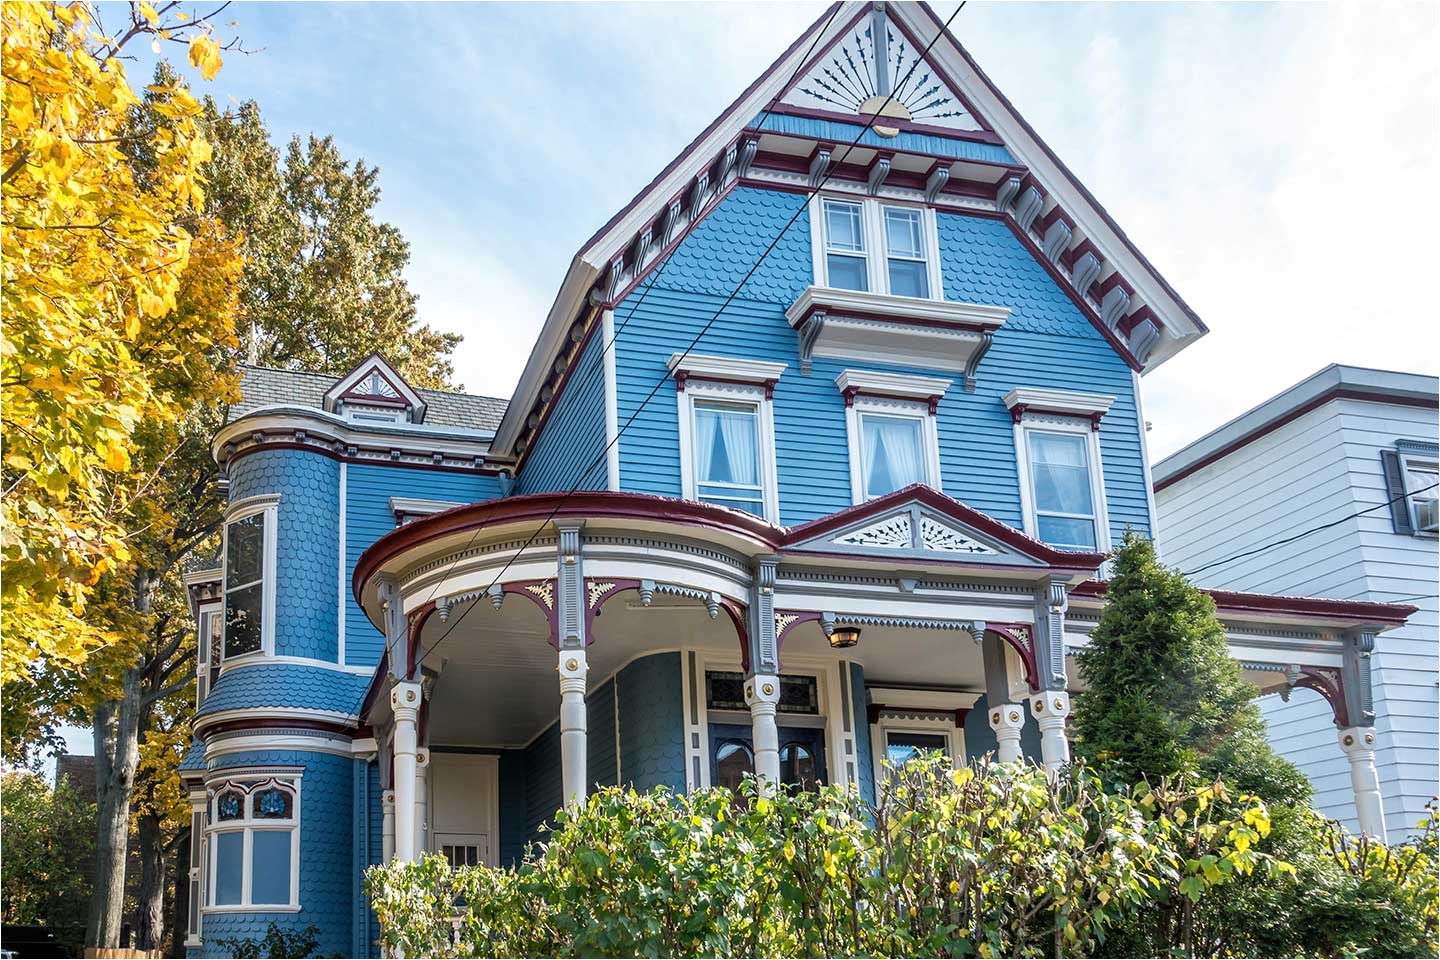 Victorian Homes for Sale In Nj Not so Hidden Gems A Look at the Heights Historic Homes Jersey Digs